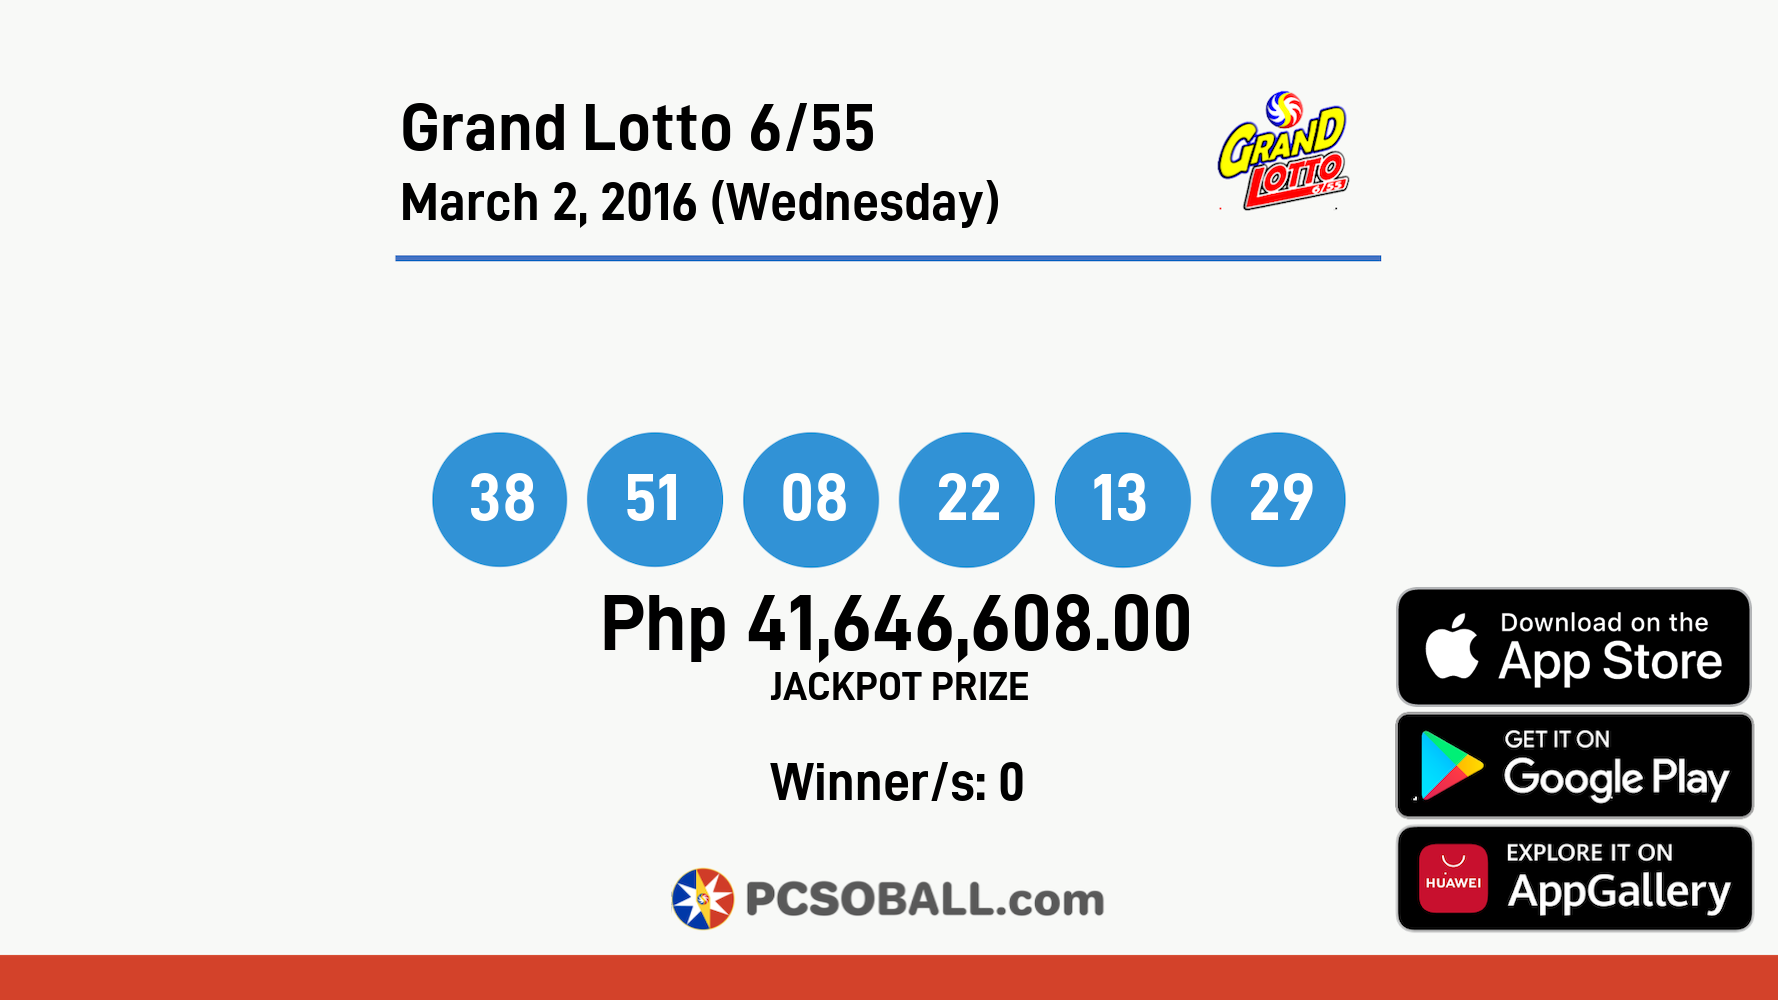 Grand Lotto 6/55 March 2, 2016 (Wednesday) Result